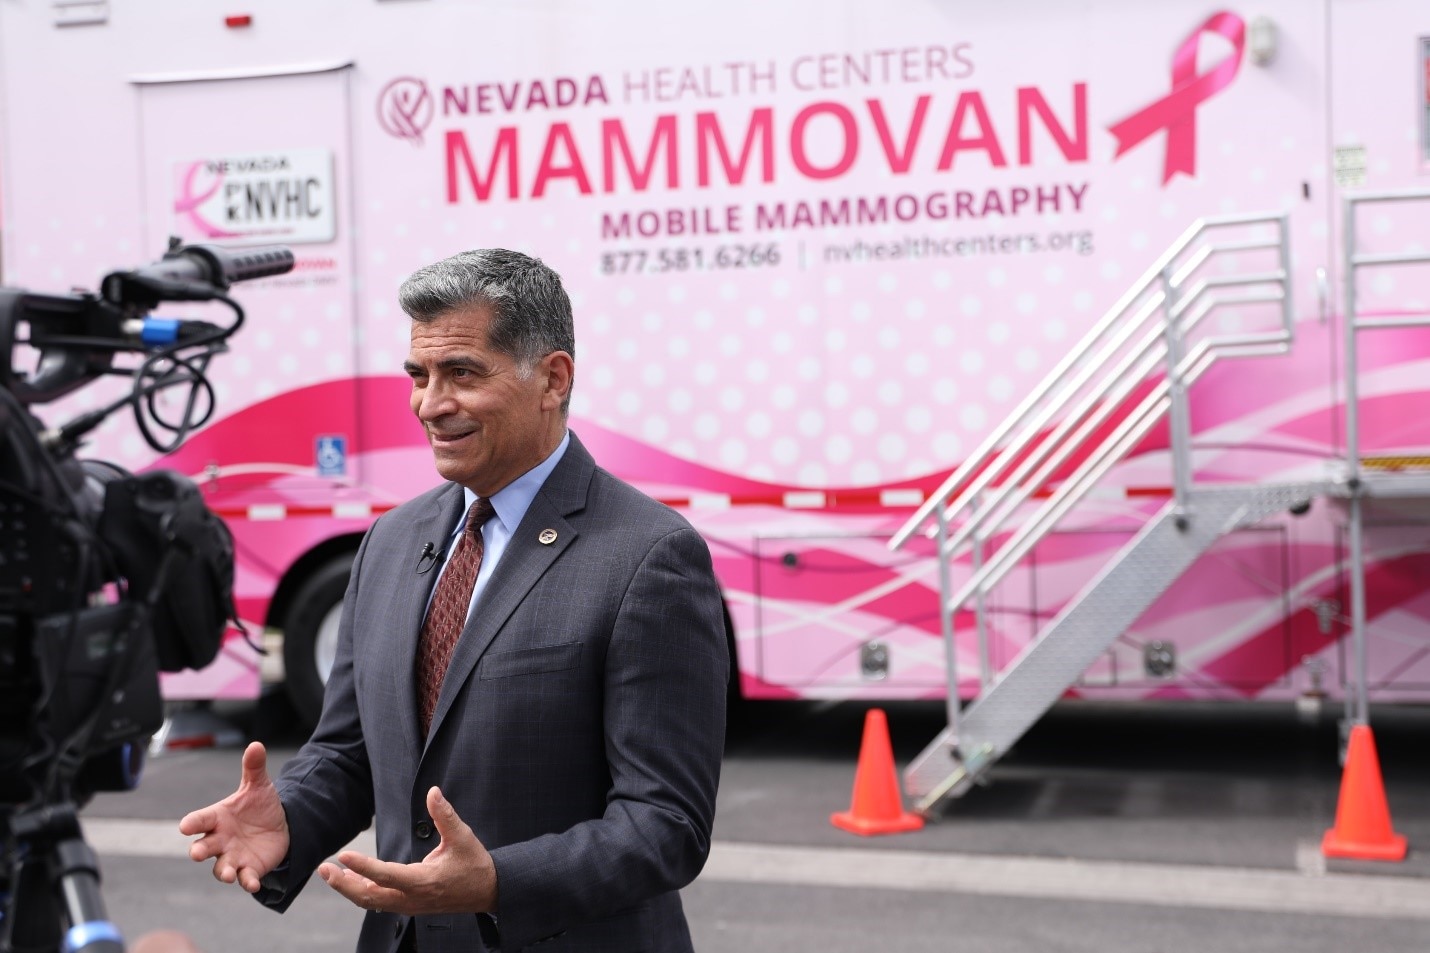 Secretary Becerra during an on camera interview outside of a Nevada Health Center Mammovan - a mobile mammography unit.